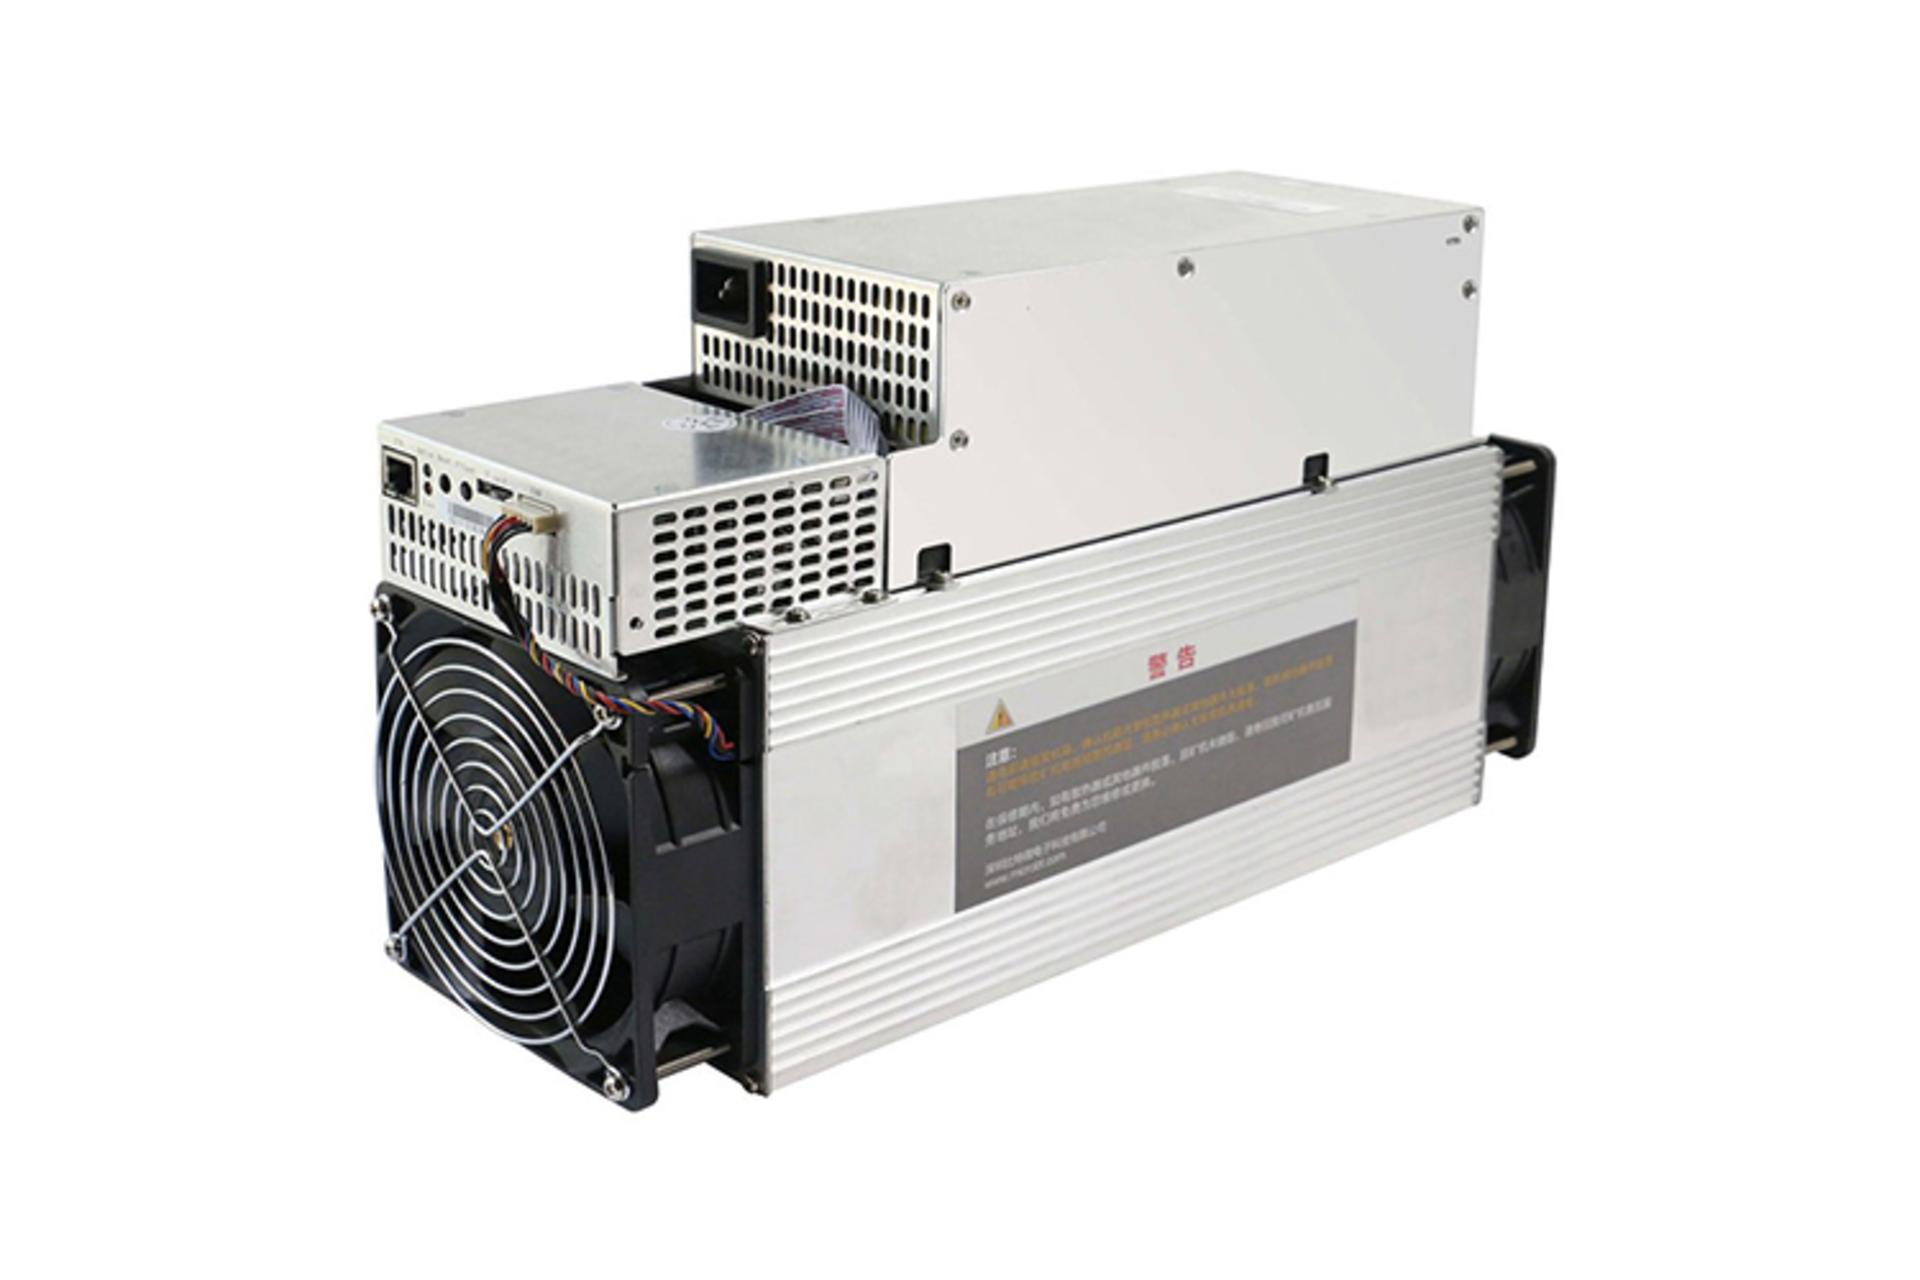 MicroBT Whatsminer M30S / ماینر MicroBT Whatsminer M30S